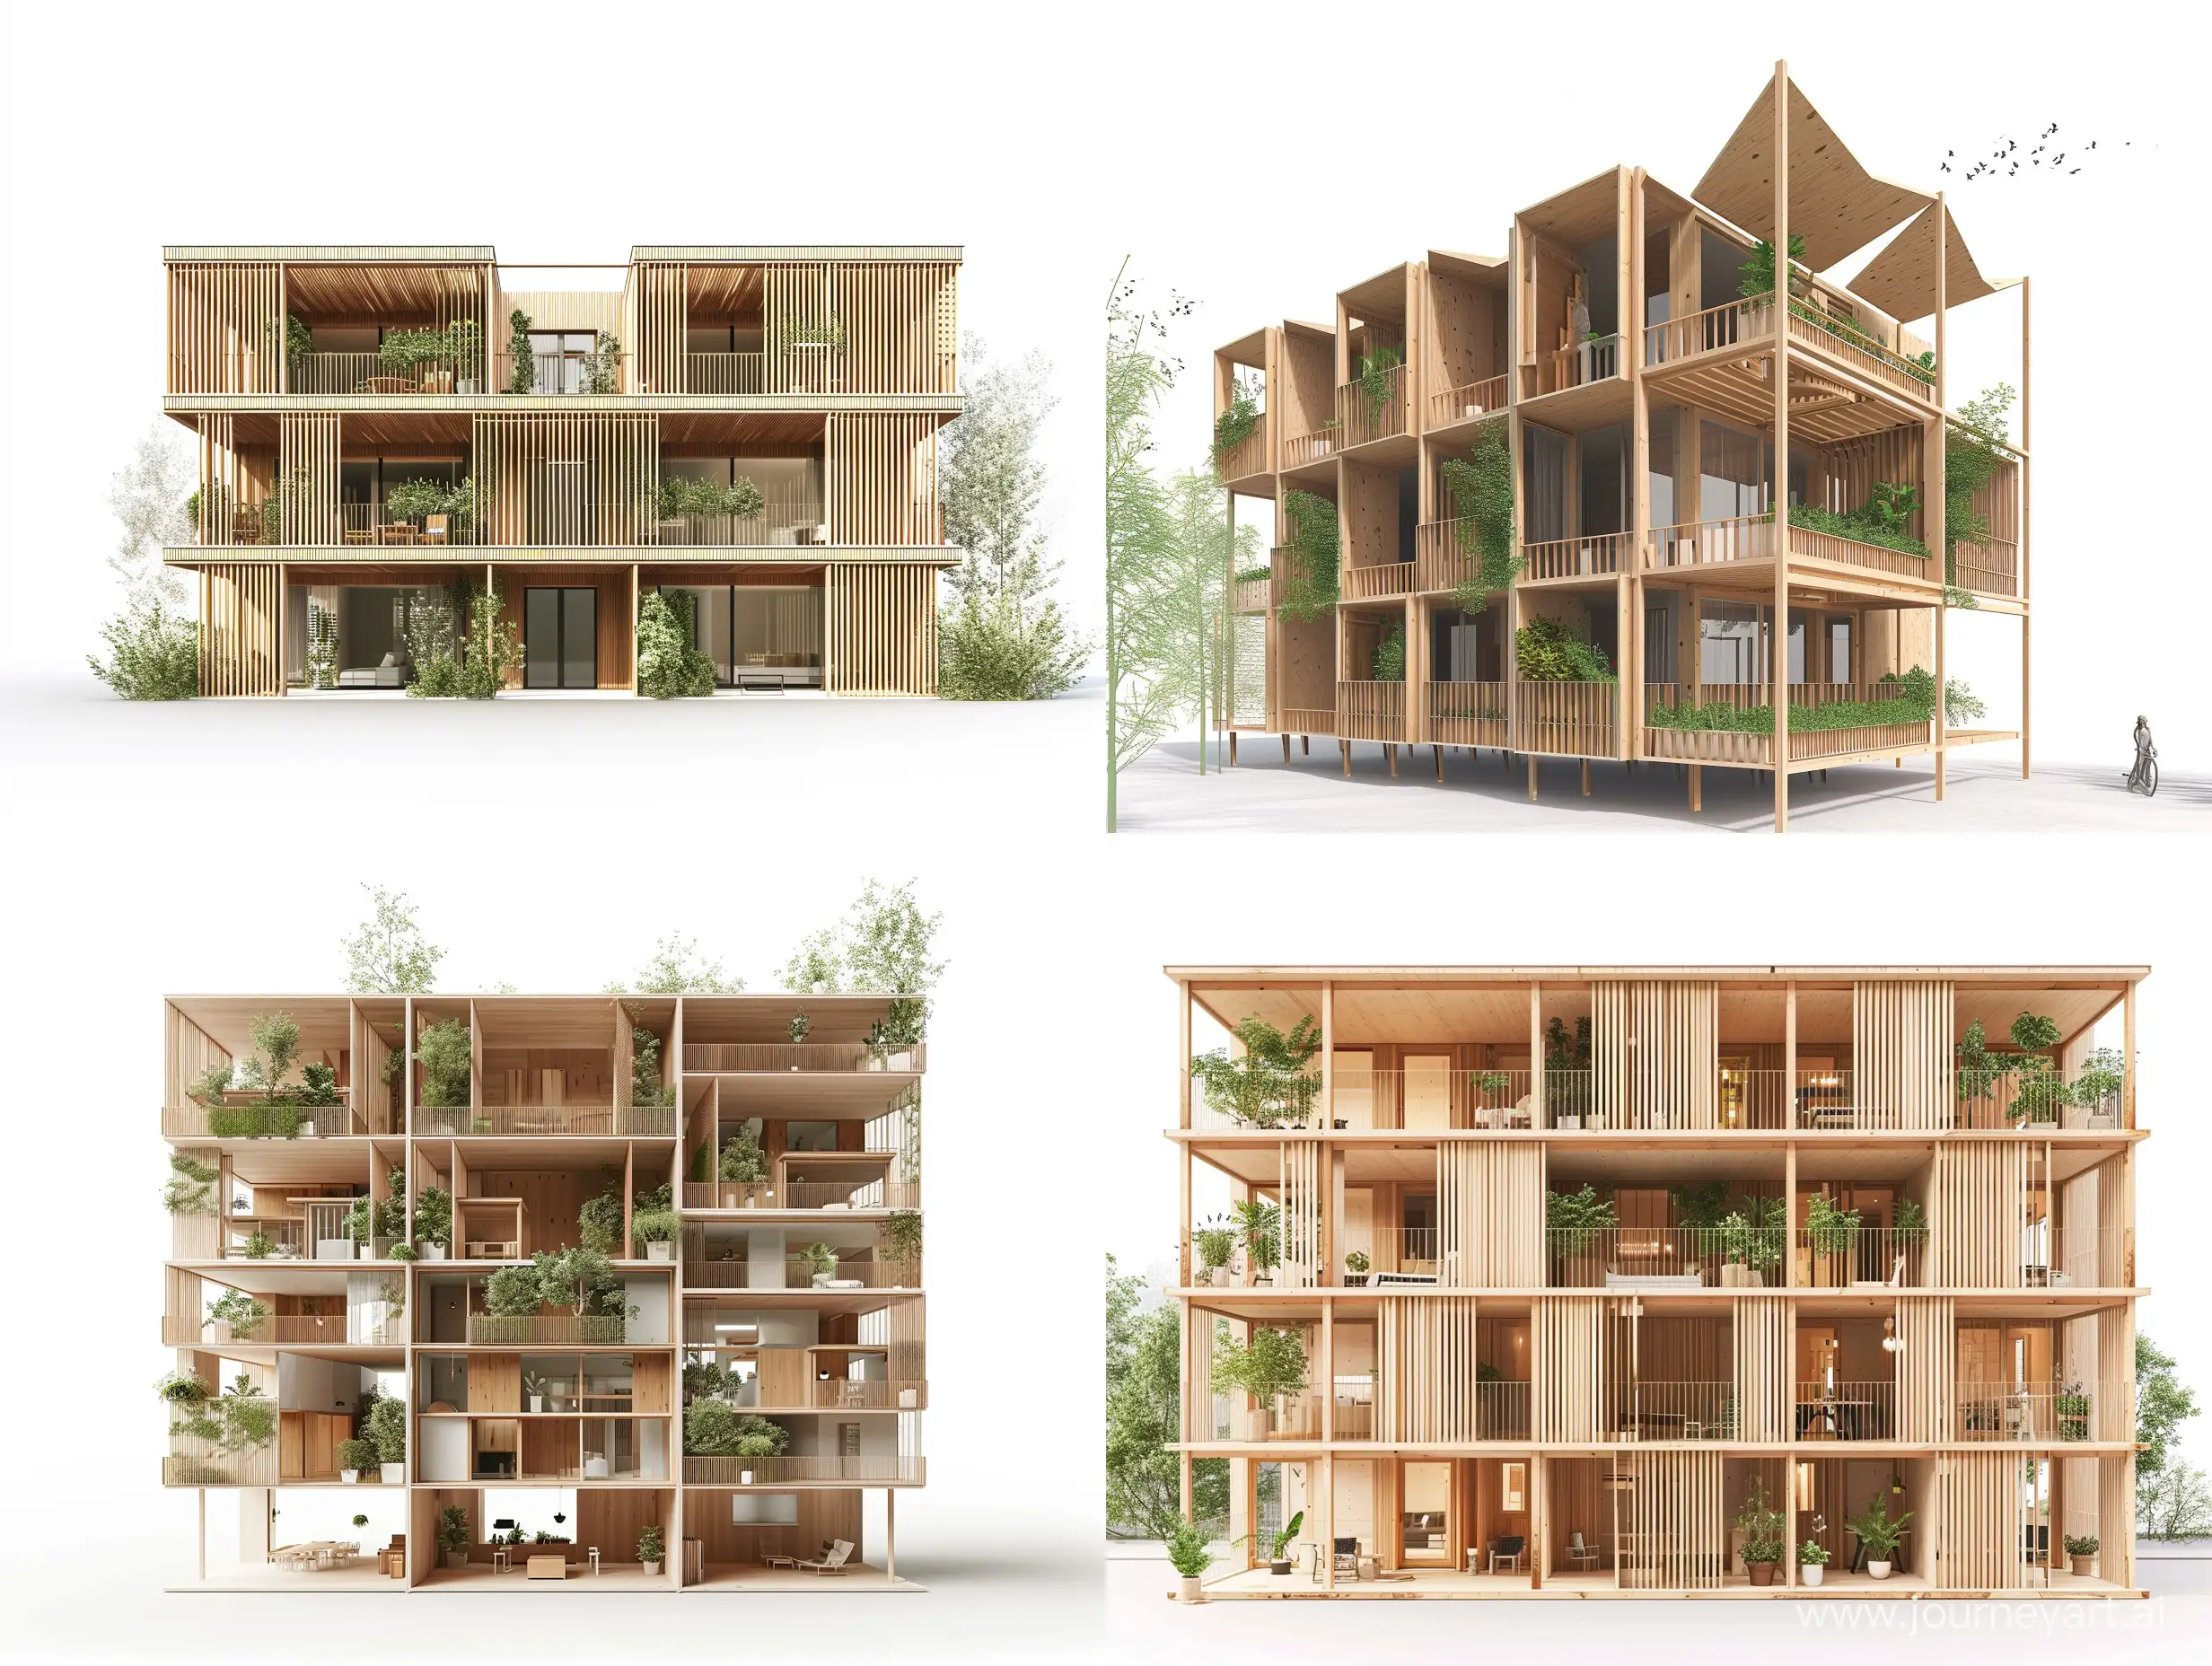 Timber-Module-3Storey-Building-with-Loggia-Facade-and-Green-Integration